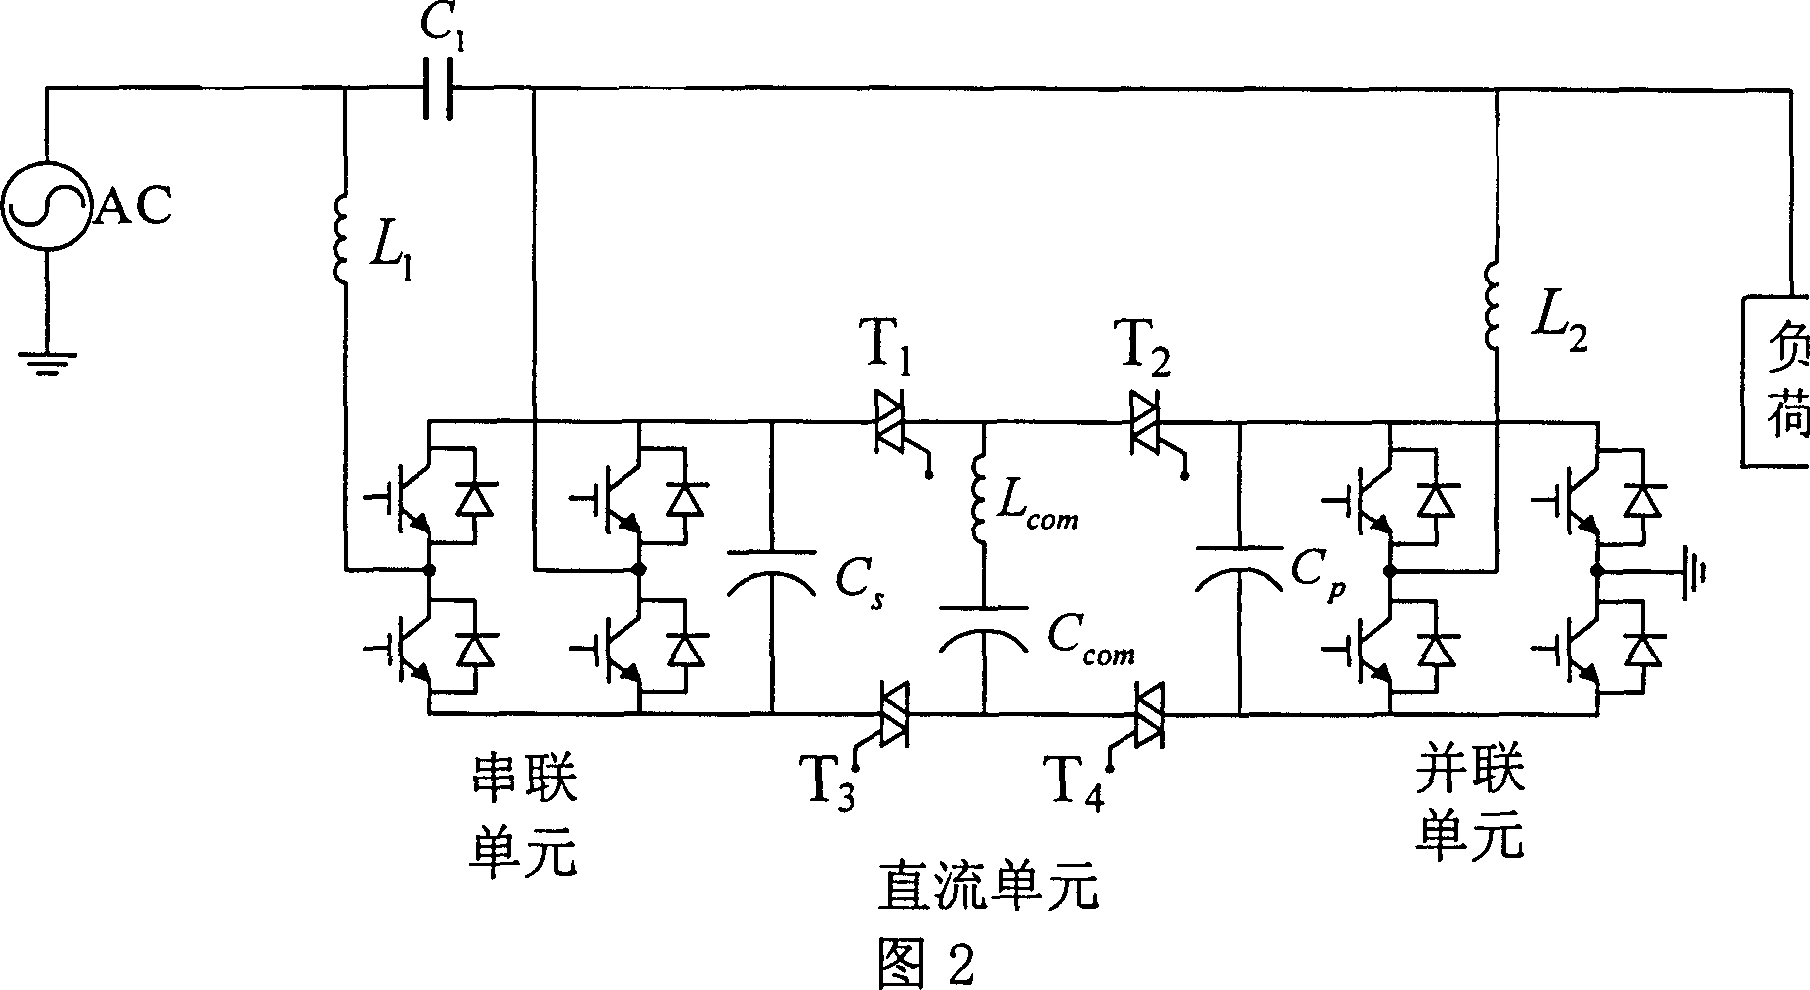 A uniform electric energy quality regulator using DC energy-storage to proceed electric isolation